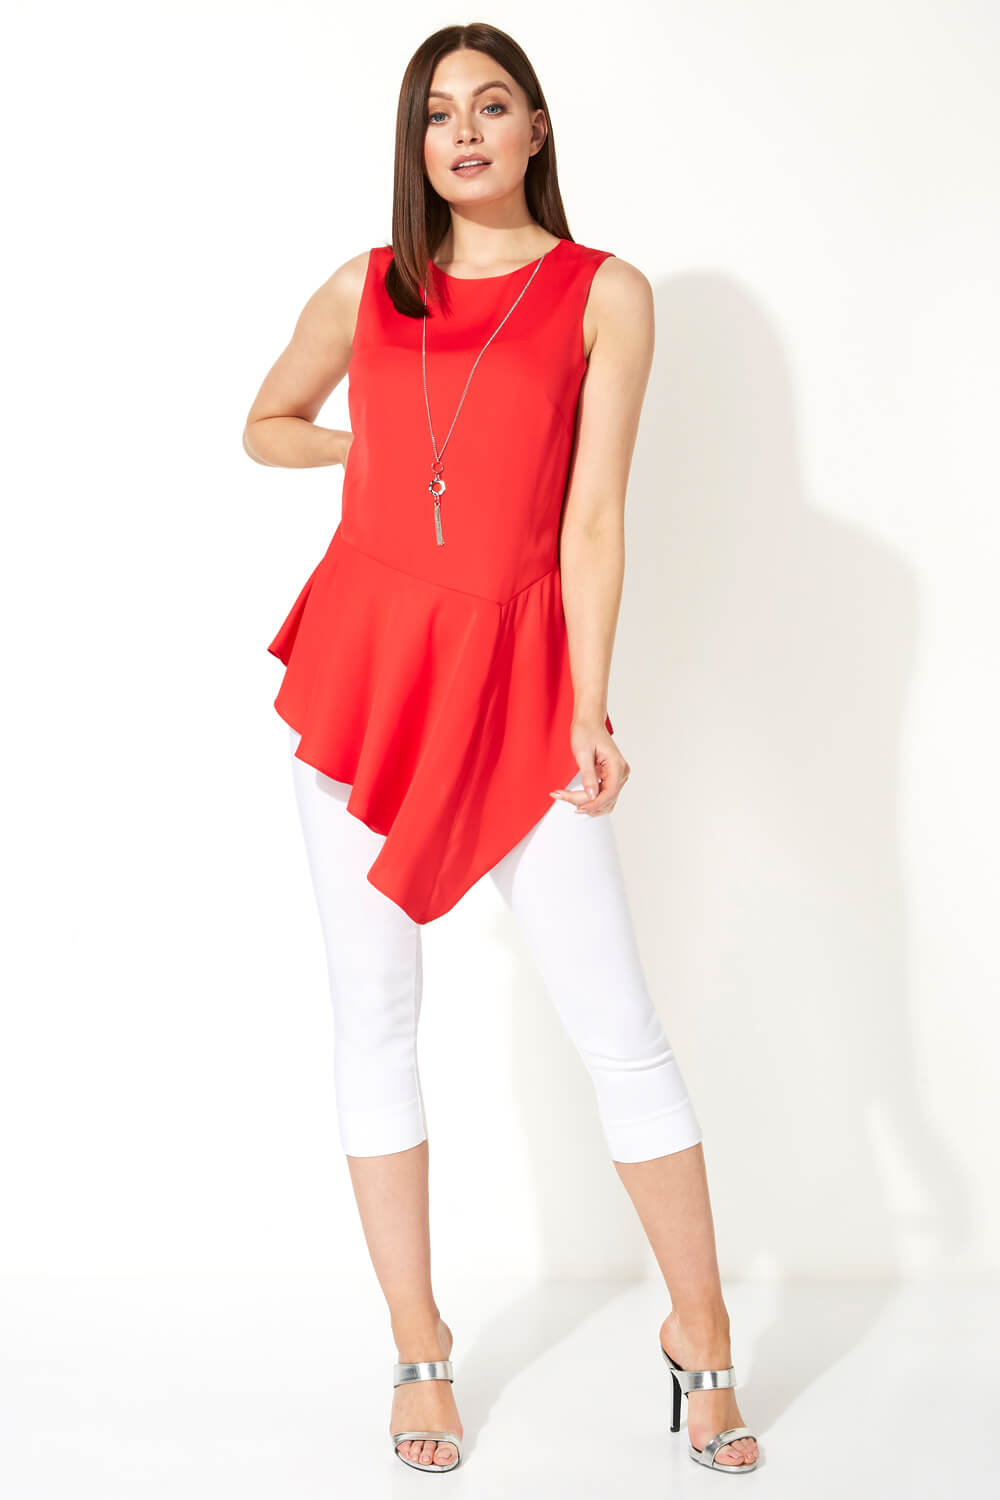 Red Asymmetric Necklace Peplum Top, Image 2 of 8